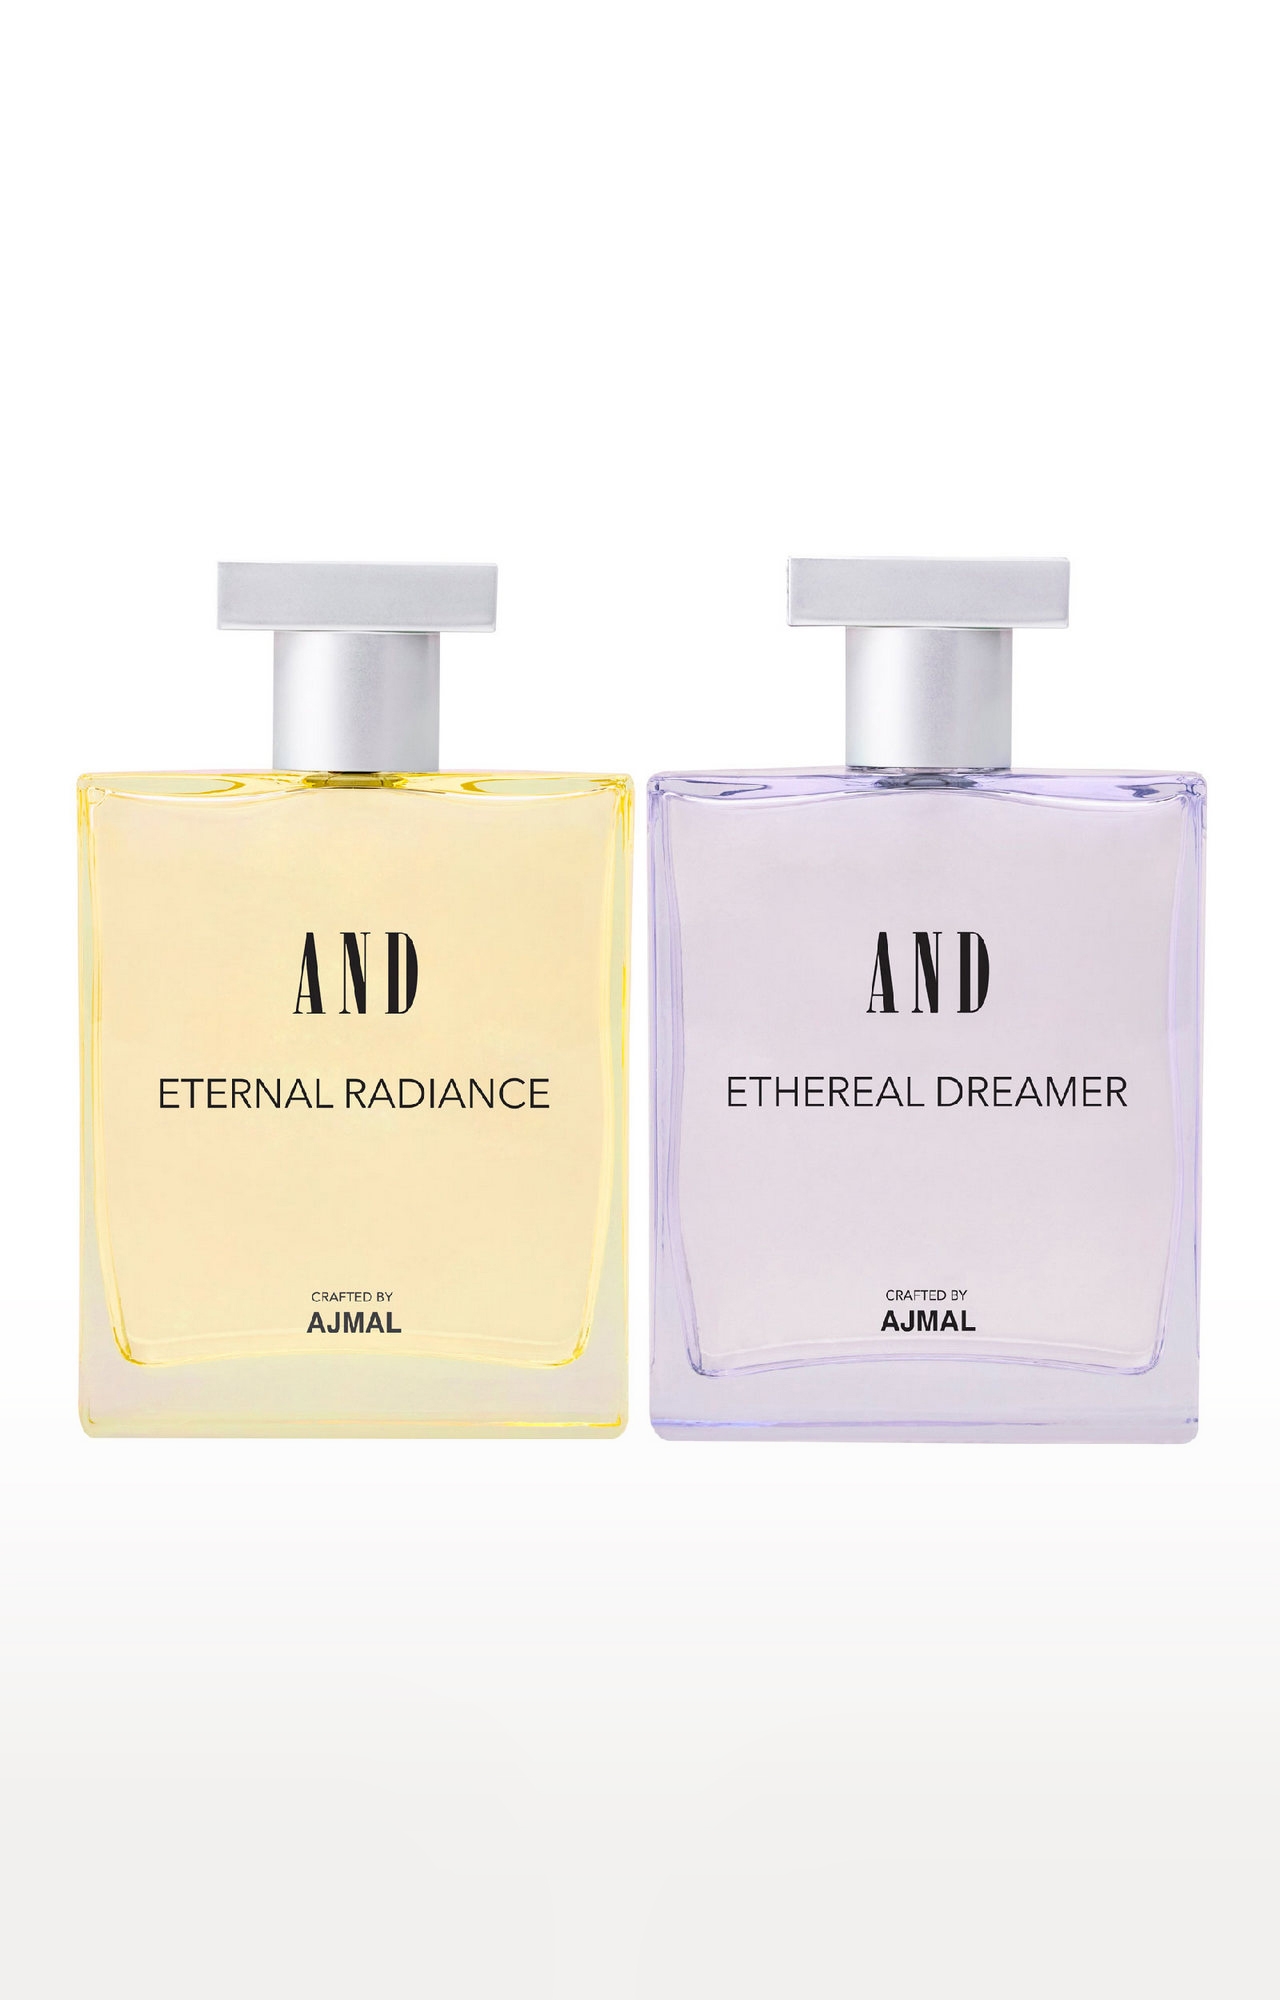 AND Crafted By Ajmal | AND Eternal Radiance & Ethereal Dreamer Pack of 2 Eau De Parfum 100ML each for Women Crafted by Ajmal 